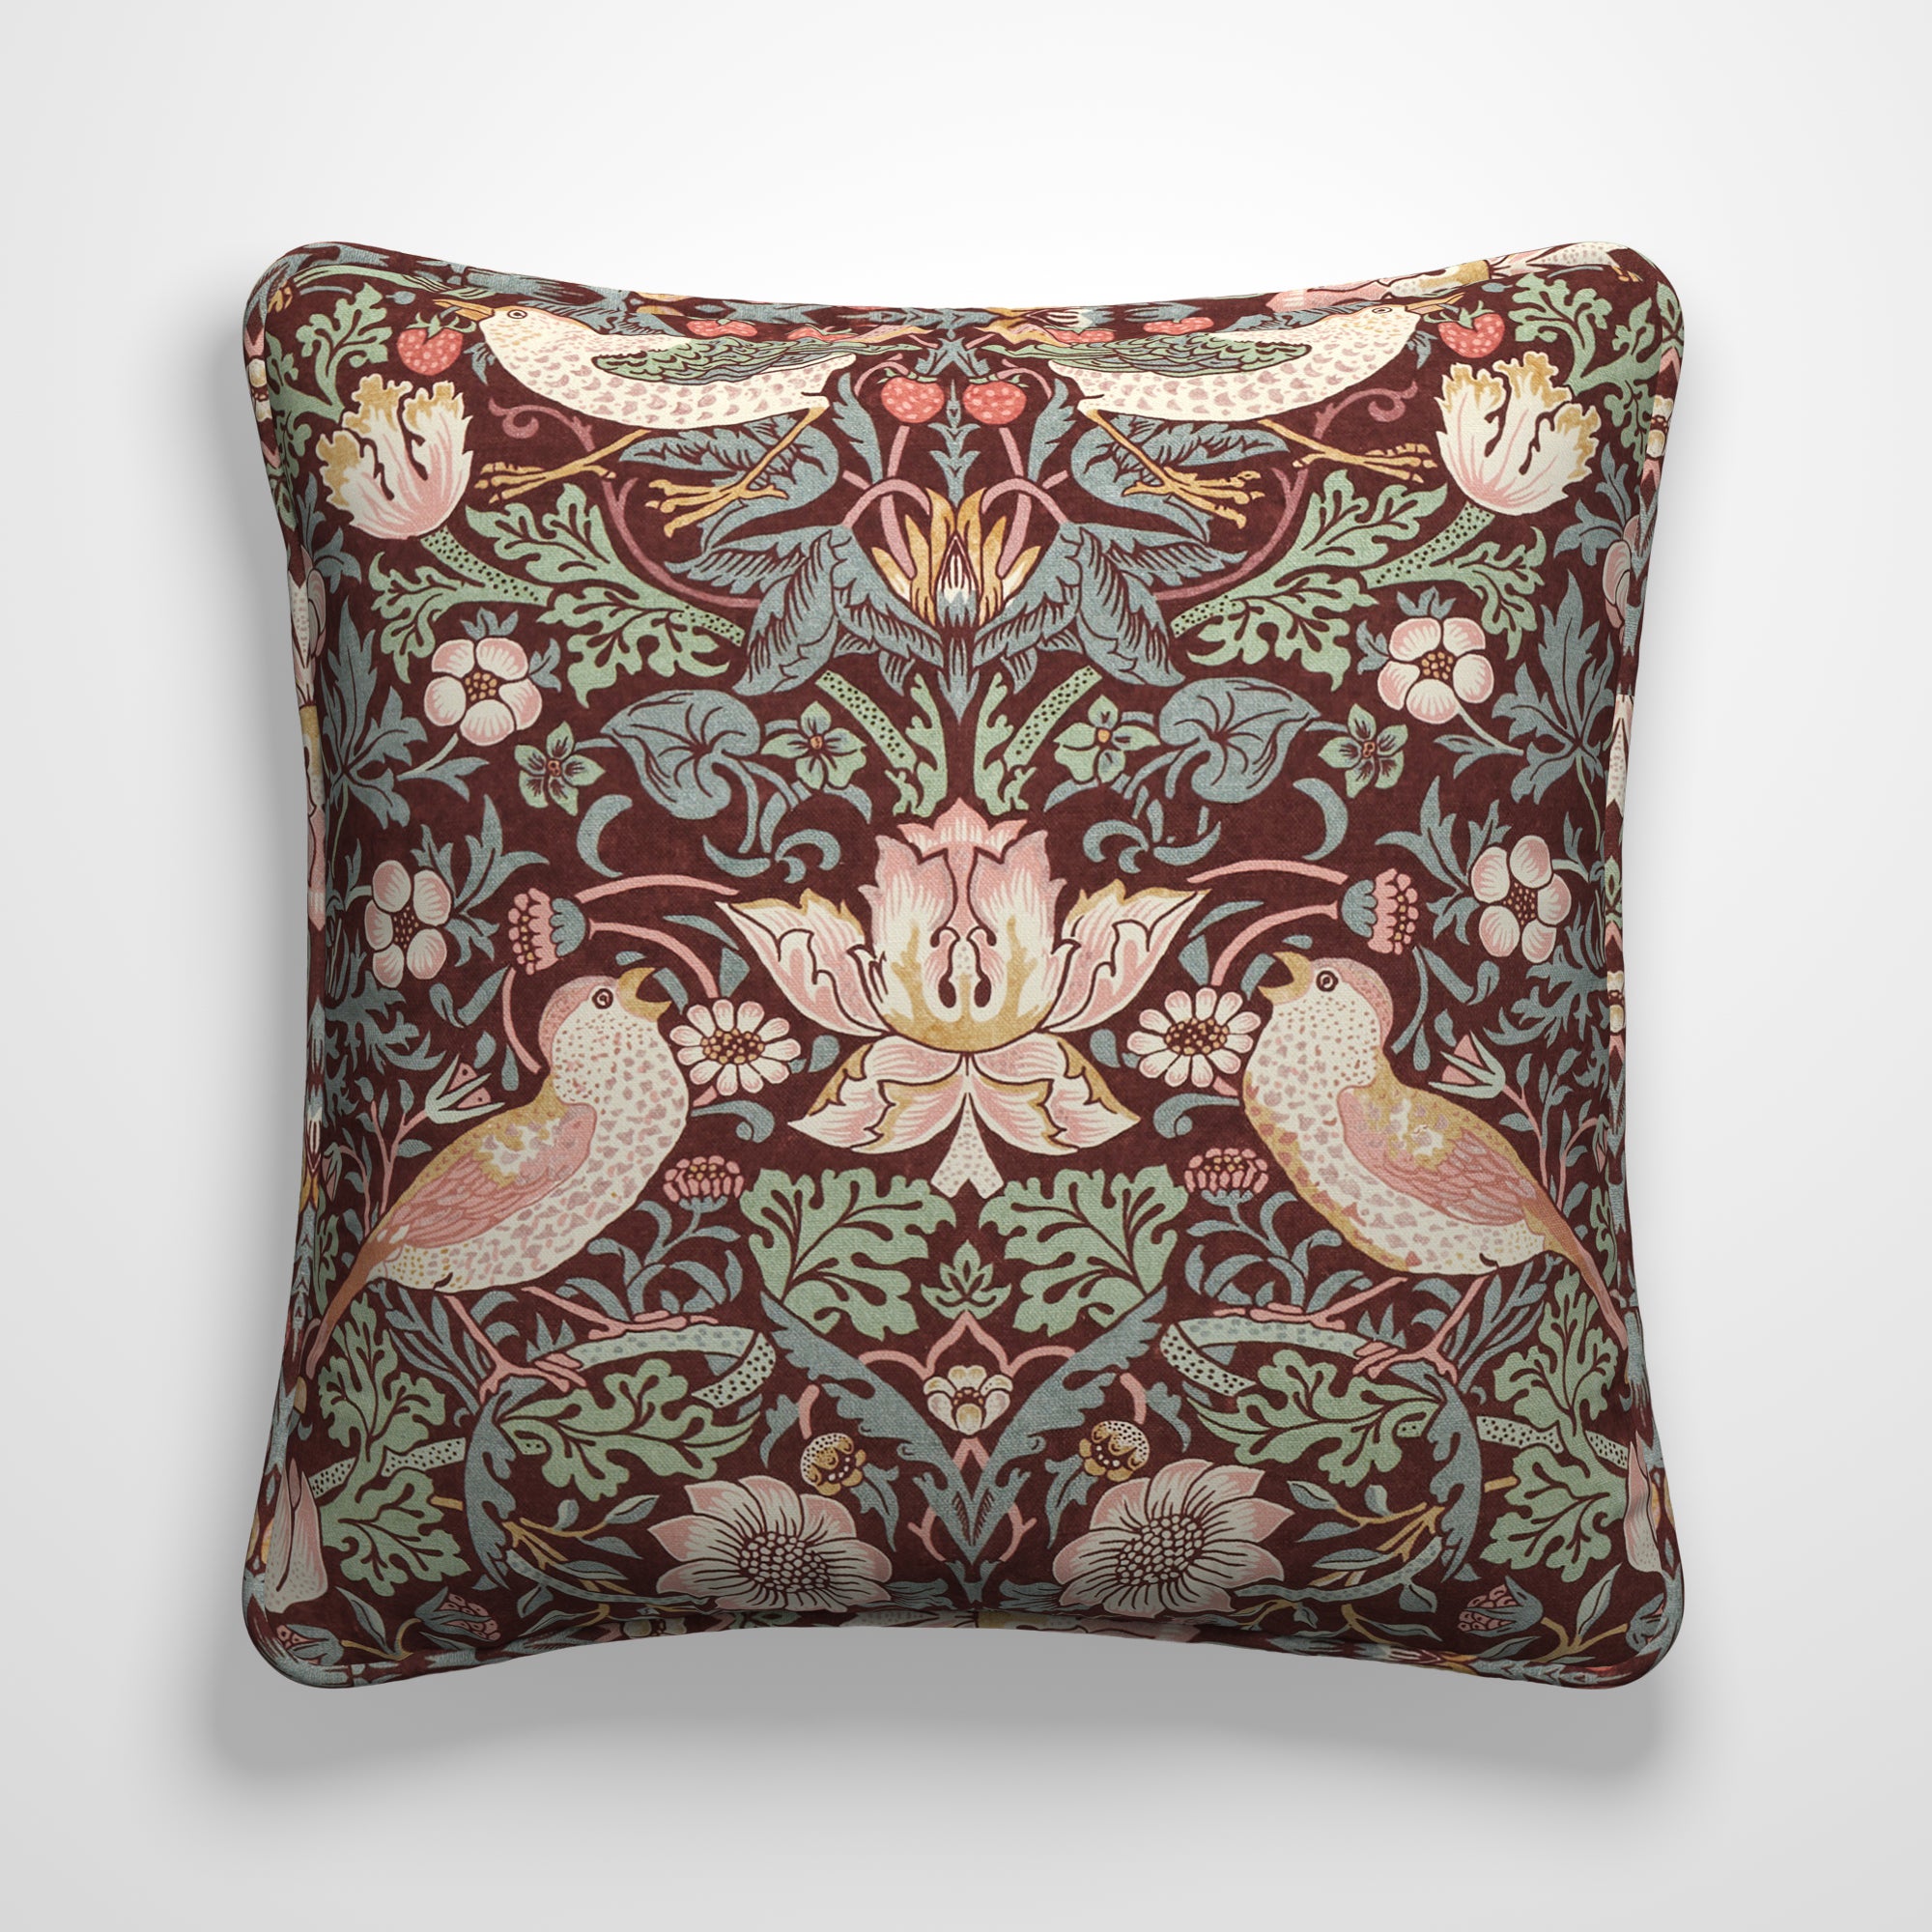 William Morris At Home Strawberry Thief Made To Order Cushion Cover Strawberry Thief Merlot